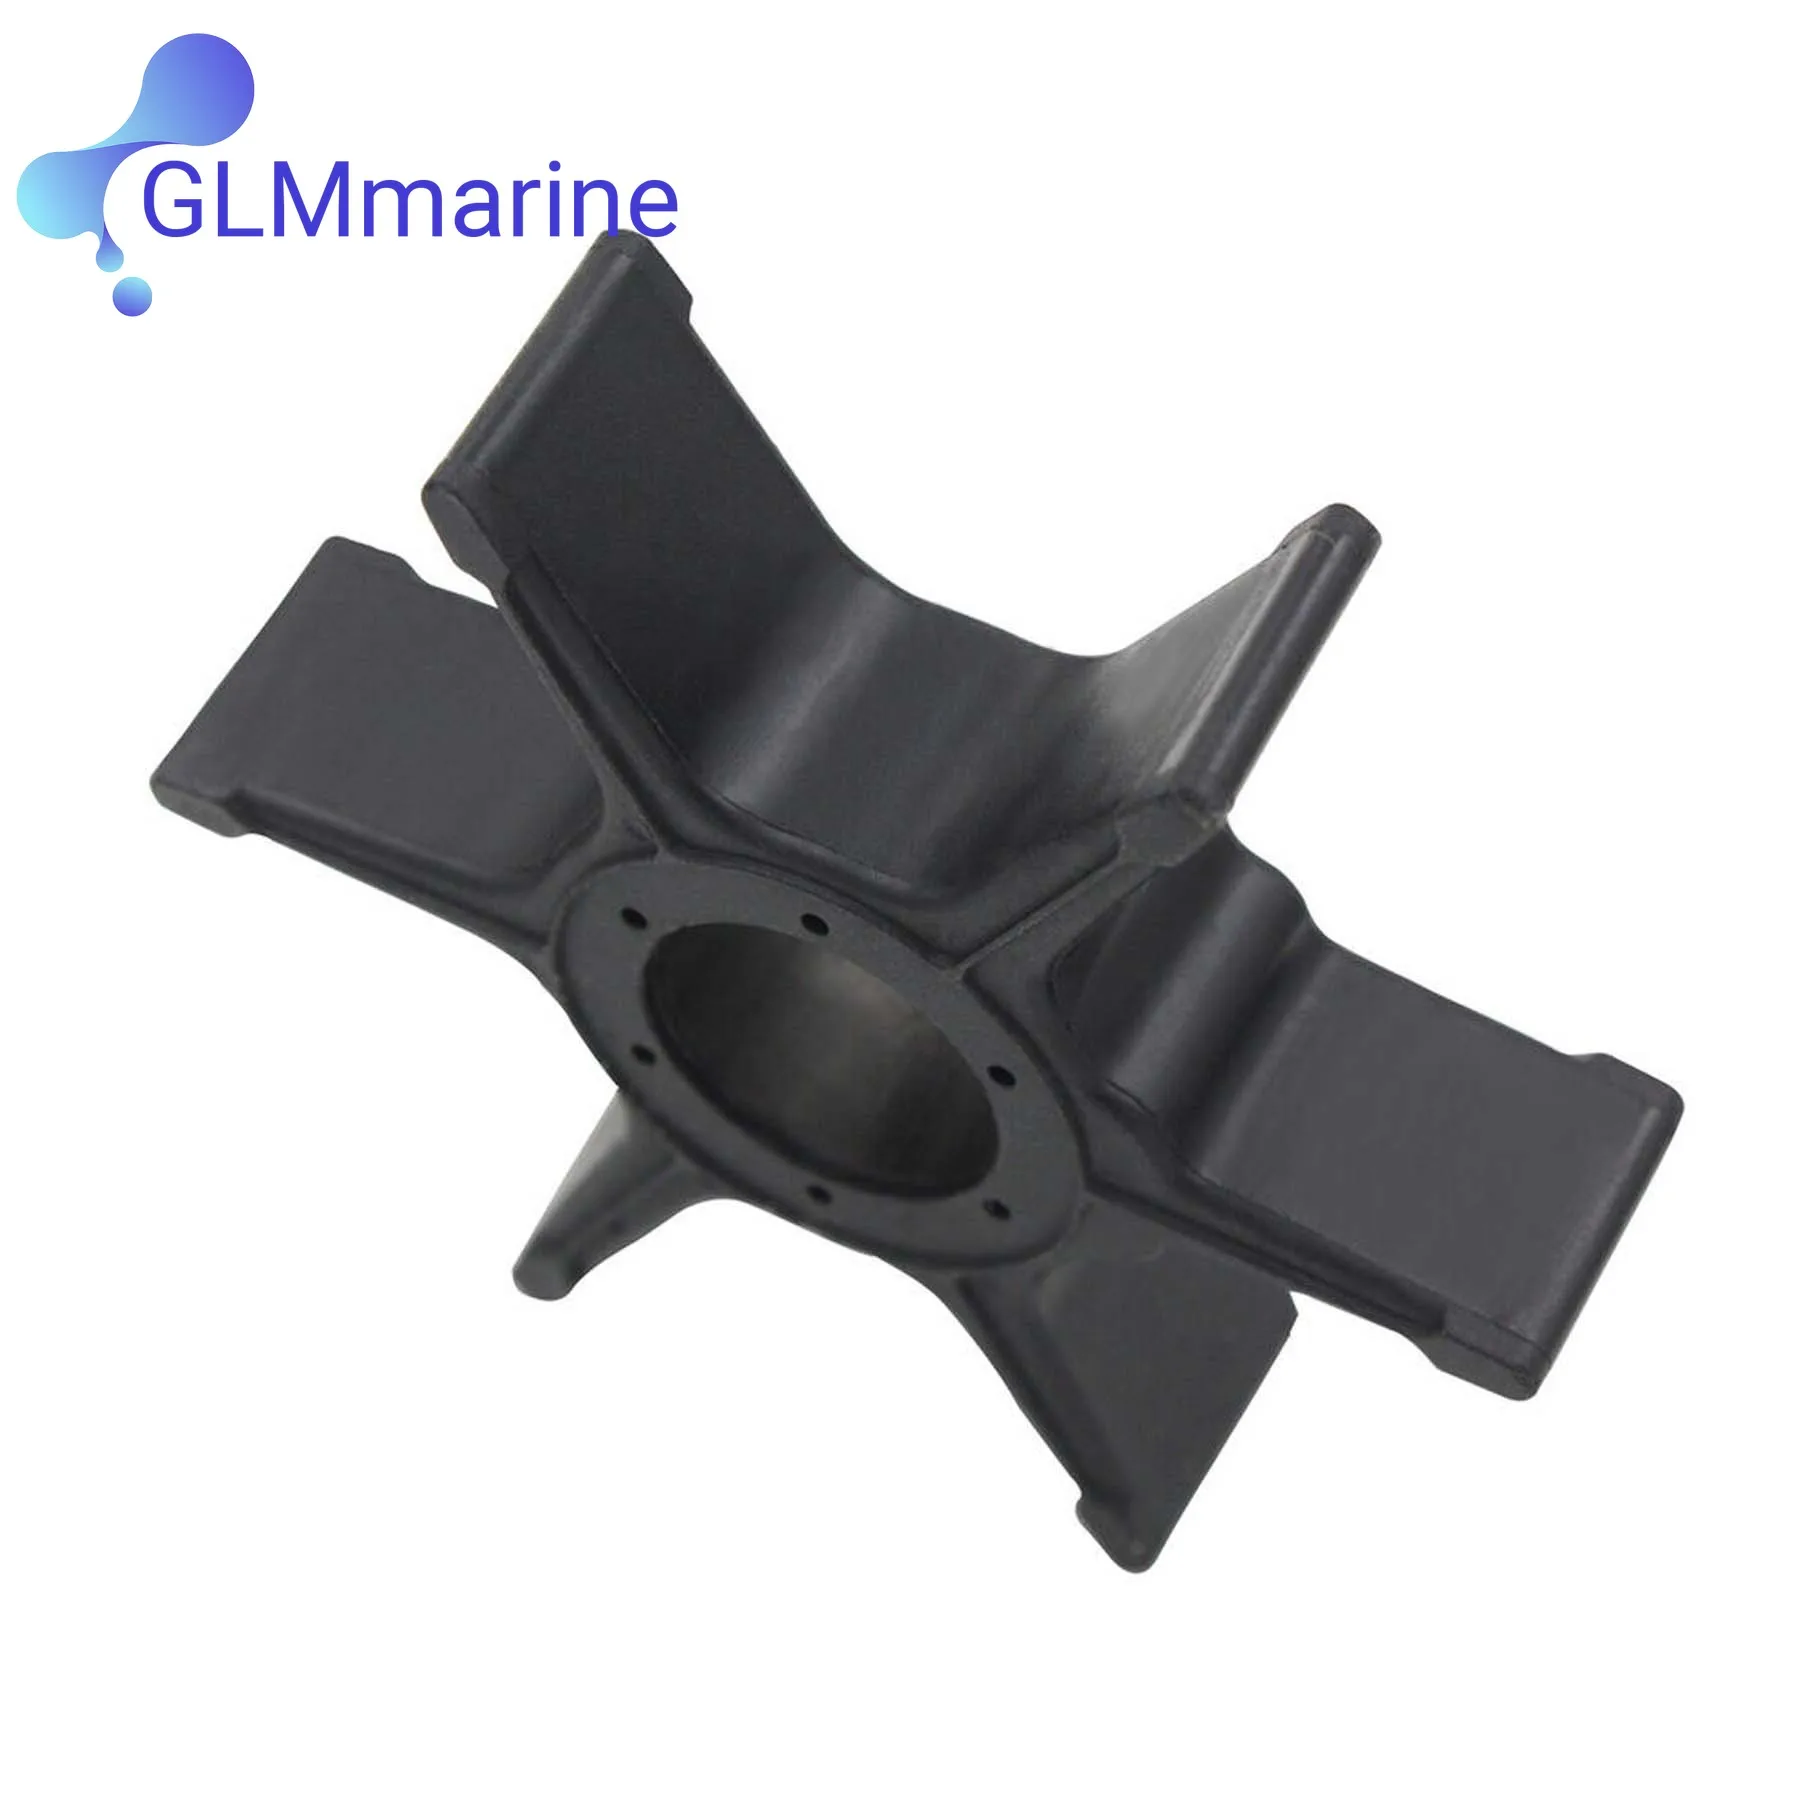 5031417 Water Pump Impeller For OMC Johnson Evinrude 25HP 30HP 40HP 50HP Outboard 778296 0778296 18-3096 5003625 9-45219